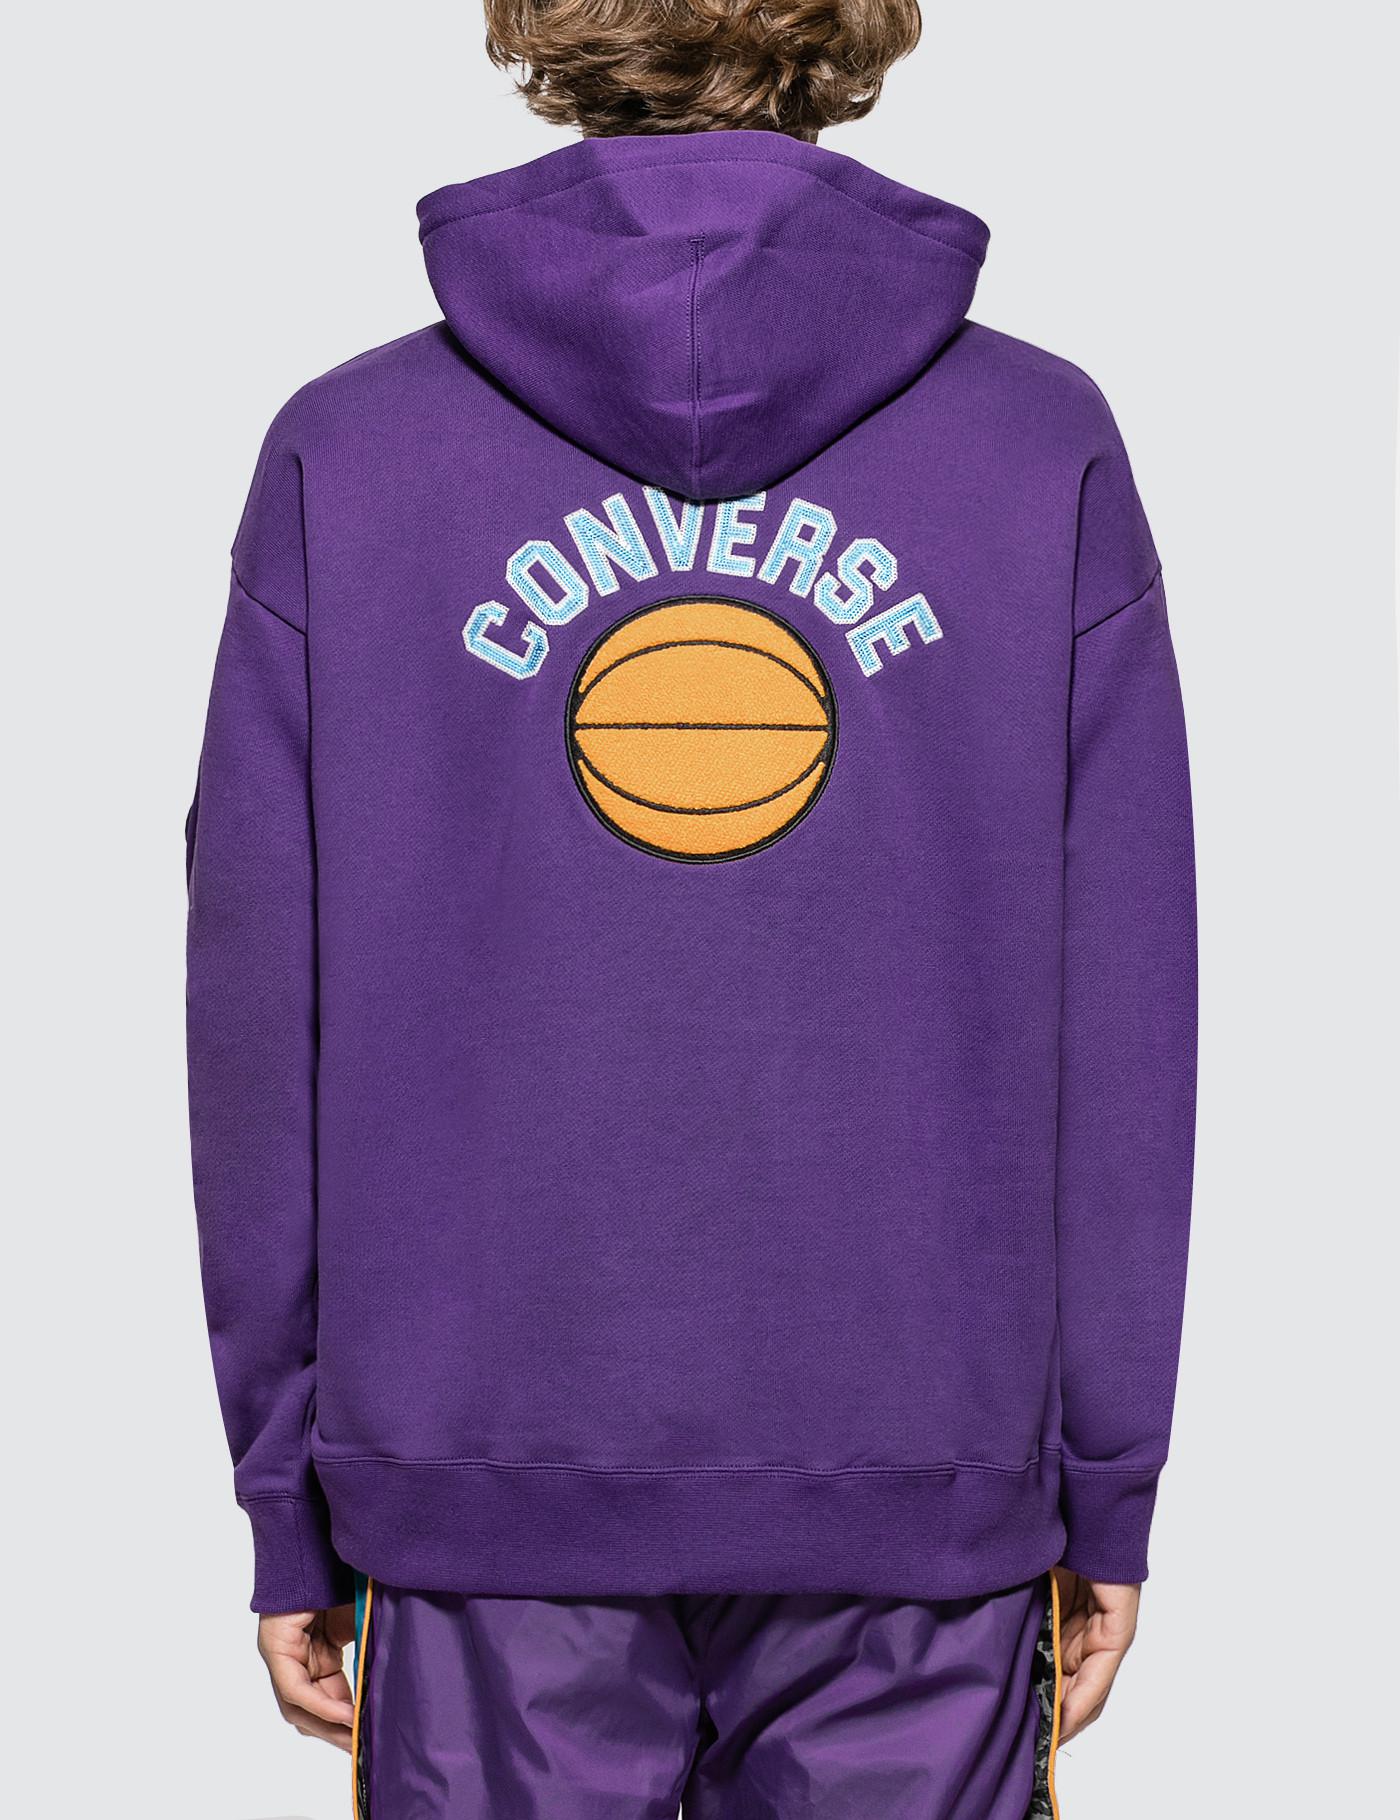 Converse Rubber X Just Don Pullover Hoodie in Purple for Men - Lyst